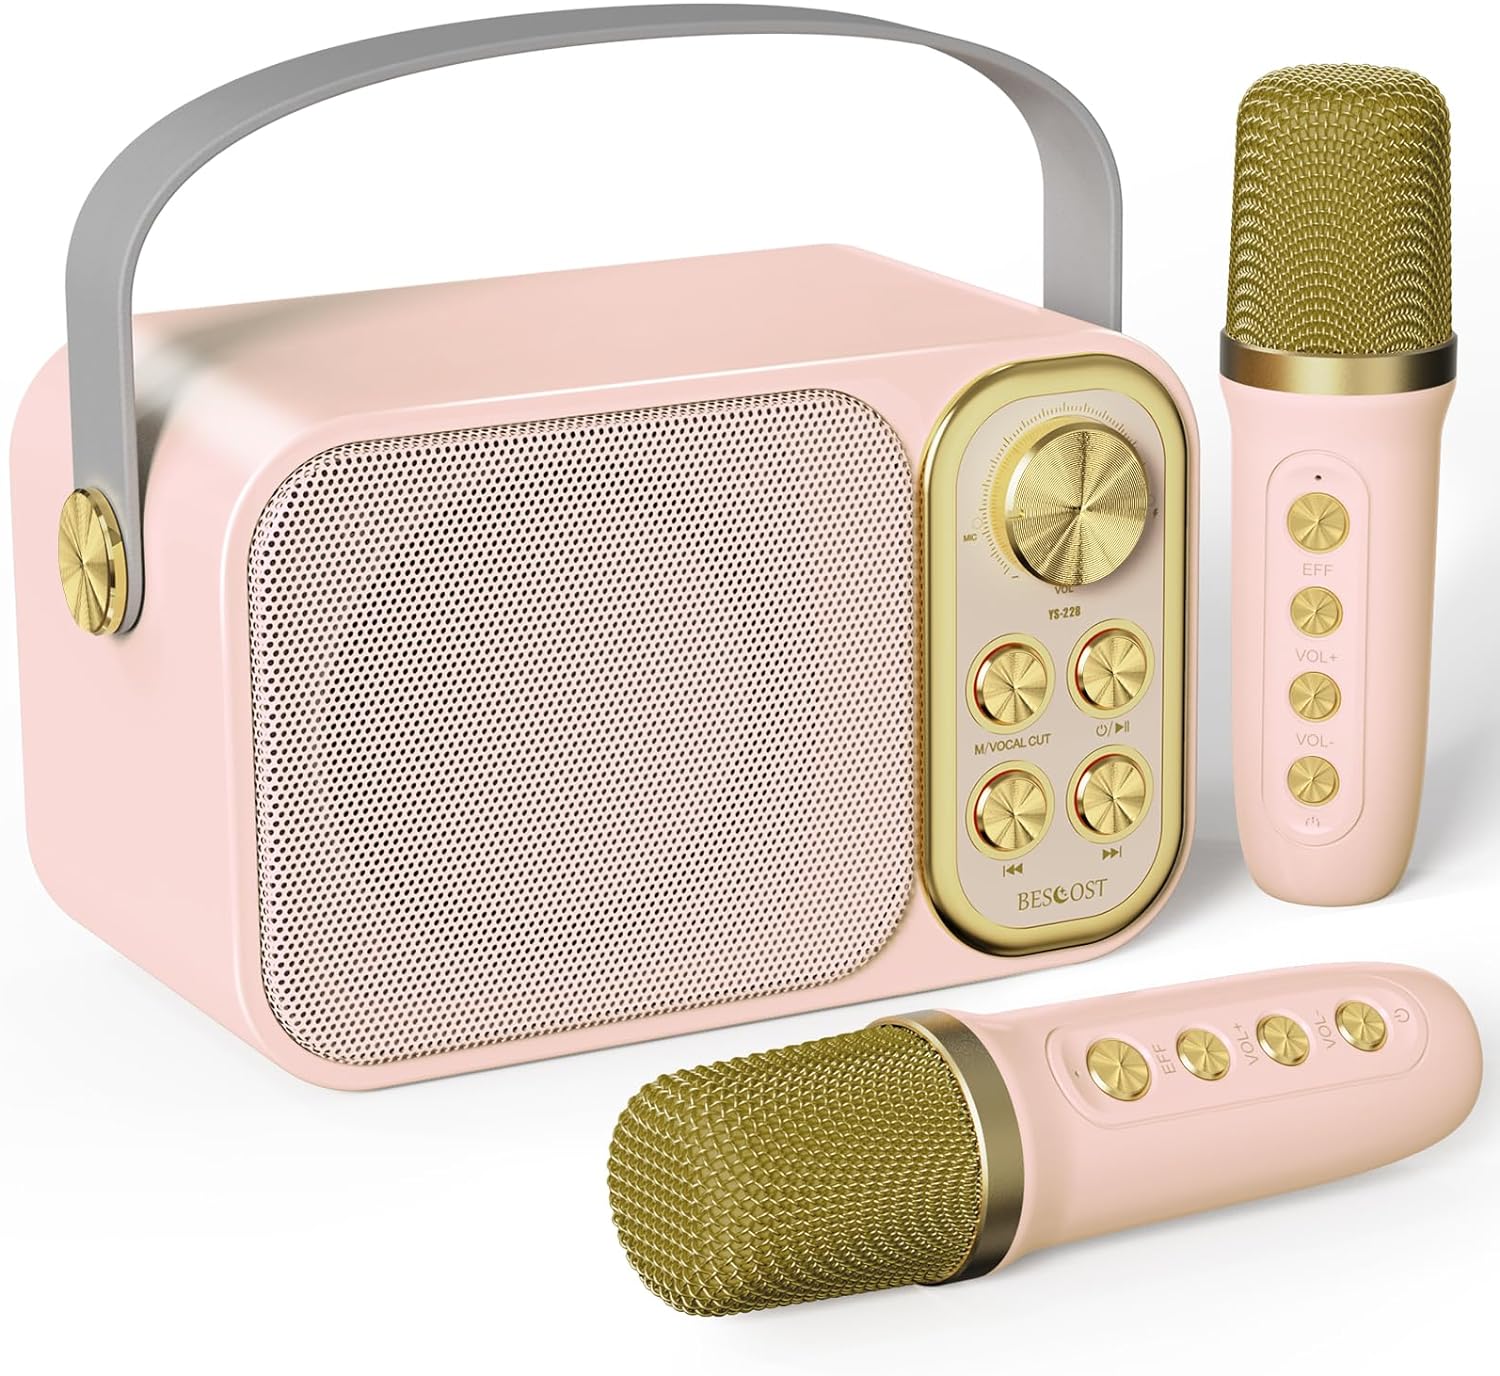 Mini Karaoke Machine for Kids, with 2 Wireless Microphone, Portable Bluetooth Speaker, Kids Karaoke Machine to Sing Anywhere, for Girls, Ideal for Party, Birthday, Family Meeting